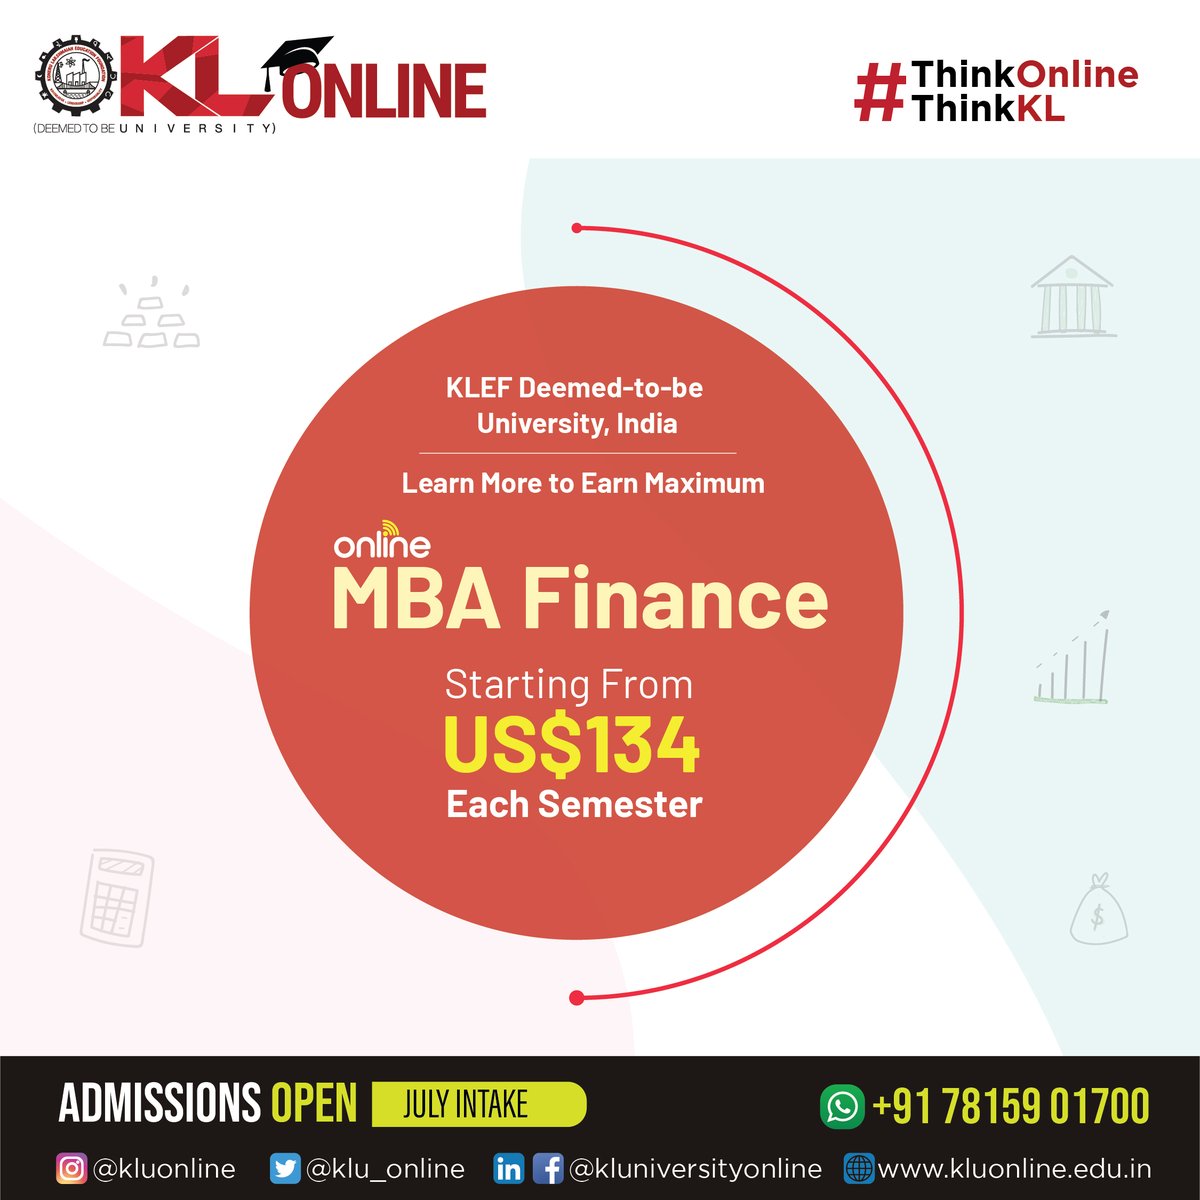 Finance is the backbone of everyone’s life. KL Online imparts quality education so that one can be successful in professional life. 

Admissions open

 #KLOnline #KLUniversity #ThinkOnlineThinkKL #AdmissionsOpen2024 #Onlinedegree #onlinelearning #OnlineMBA #pgcourses #Finance